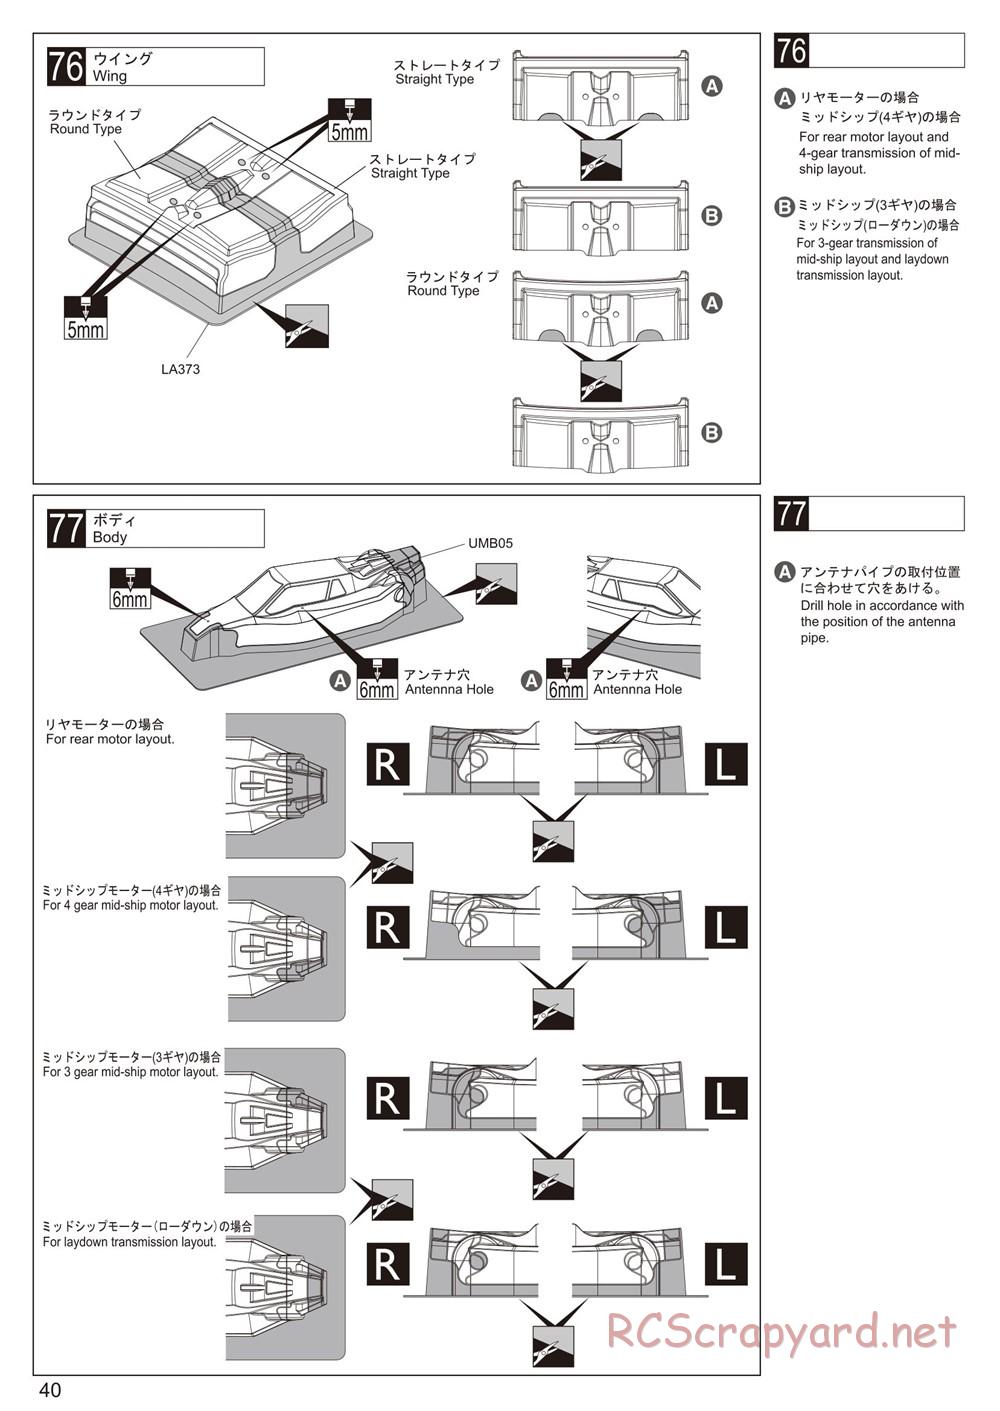 Kyosho - Ultima RB6.6 - Manual - Page 40